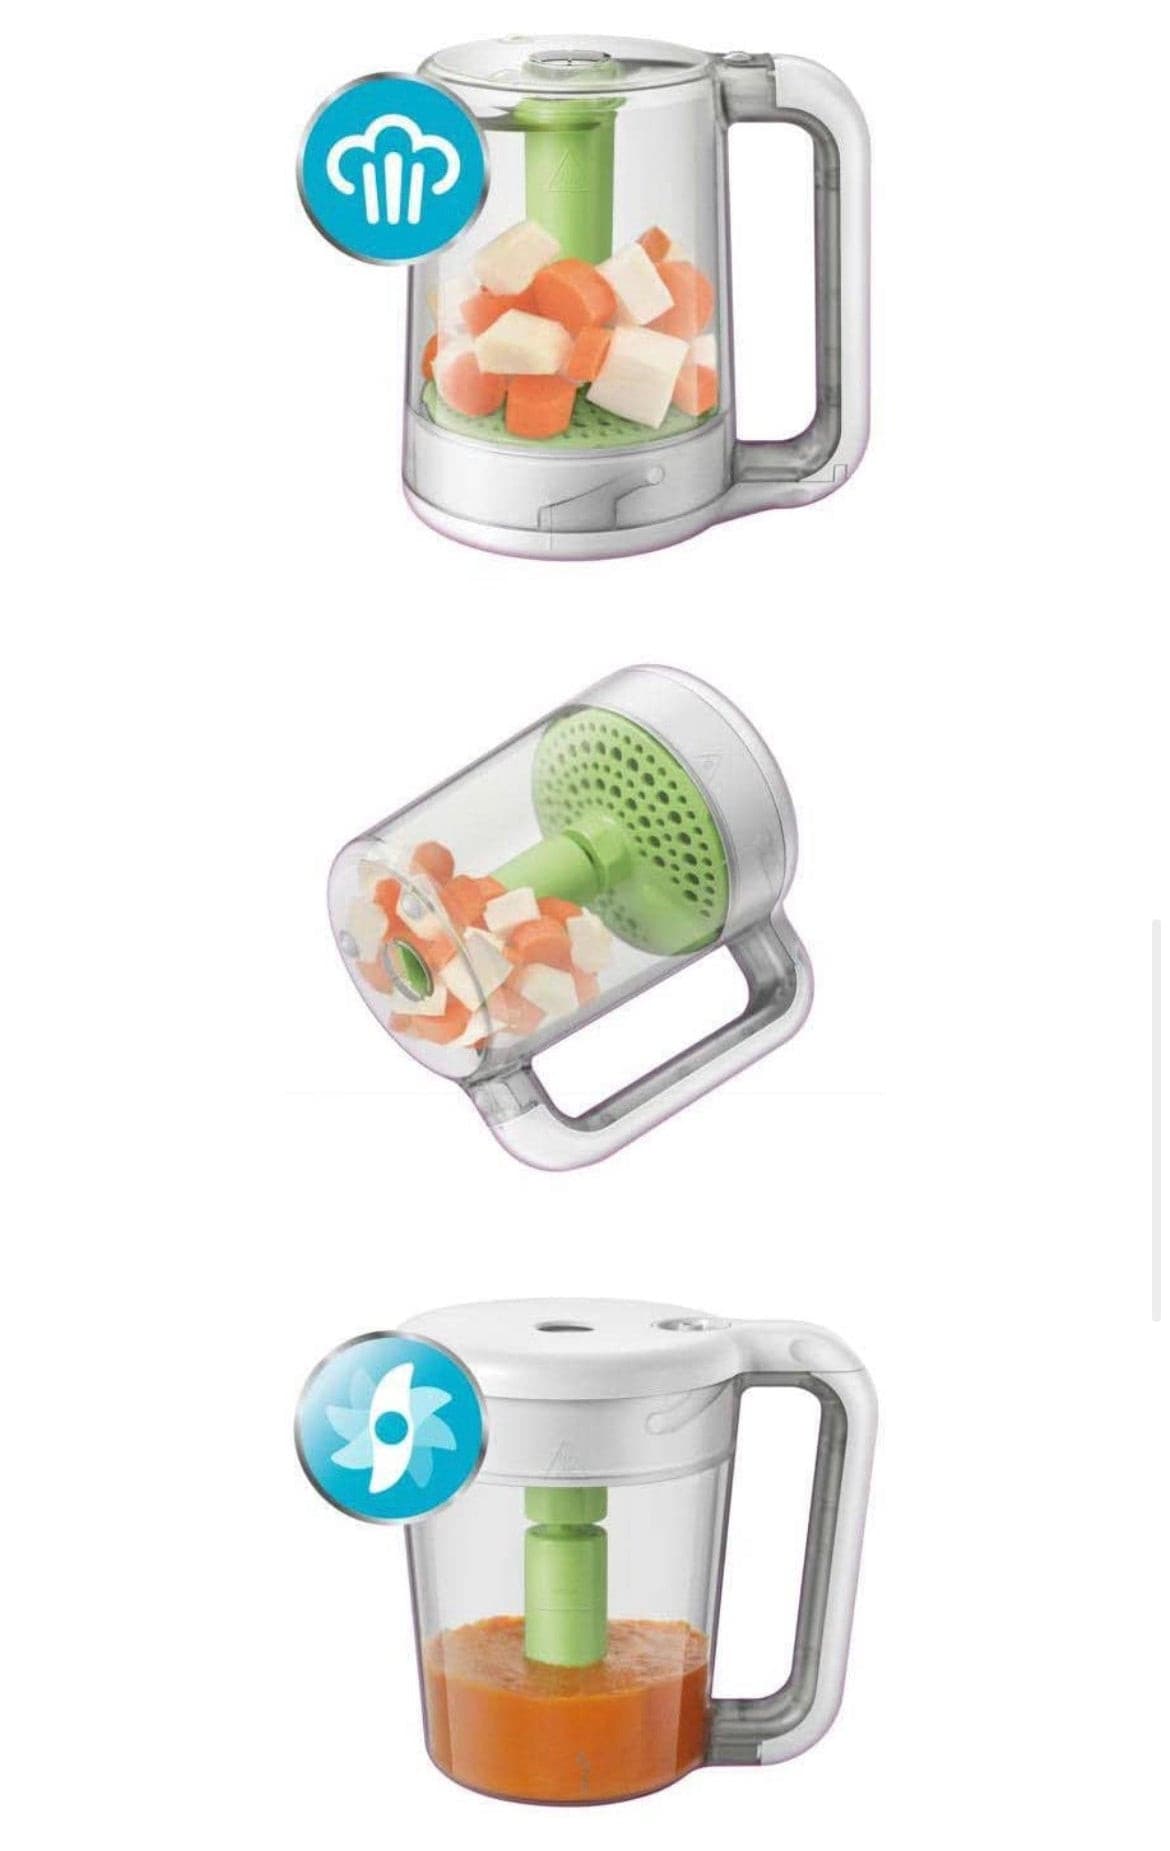 Combined Steamer and Blender by Philips Avent.